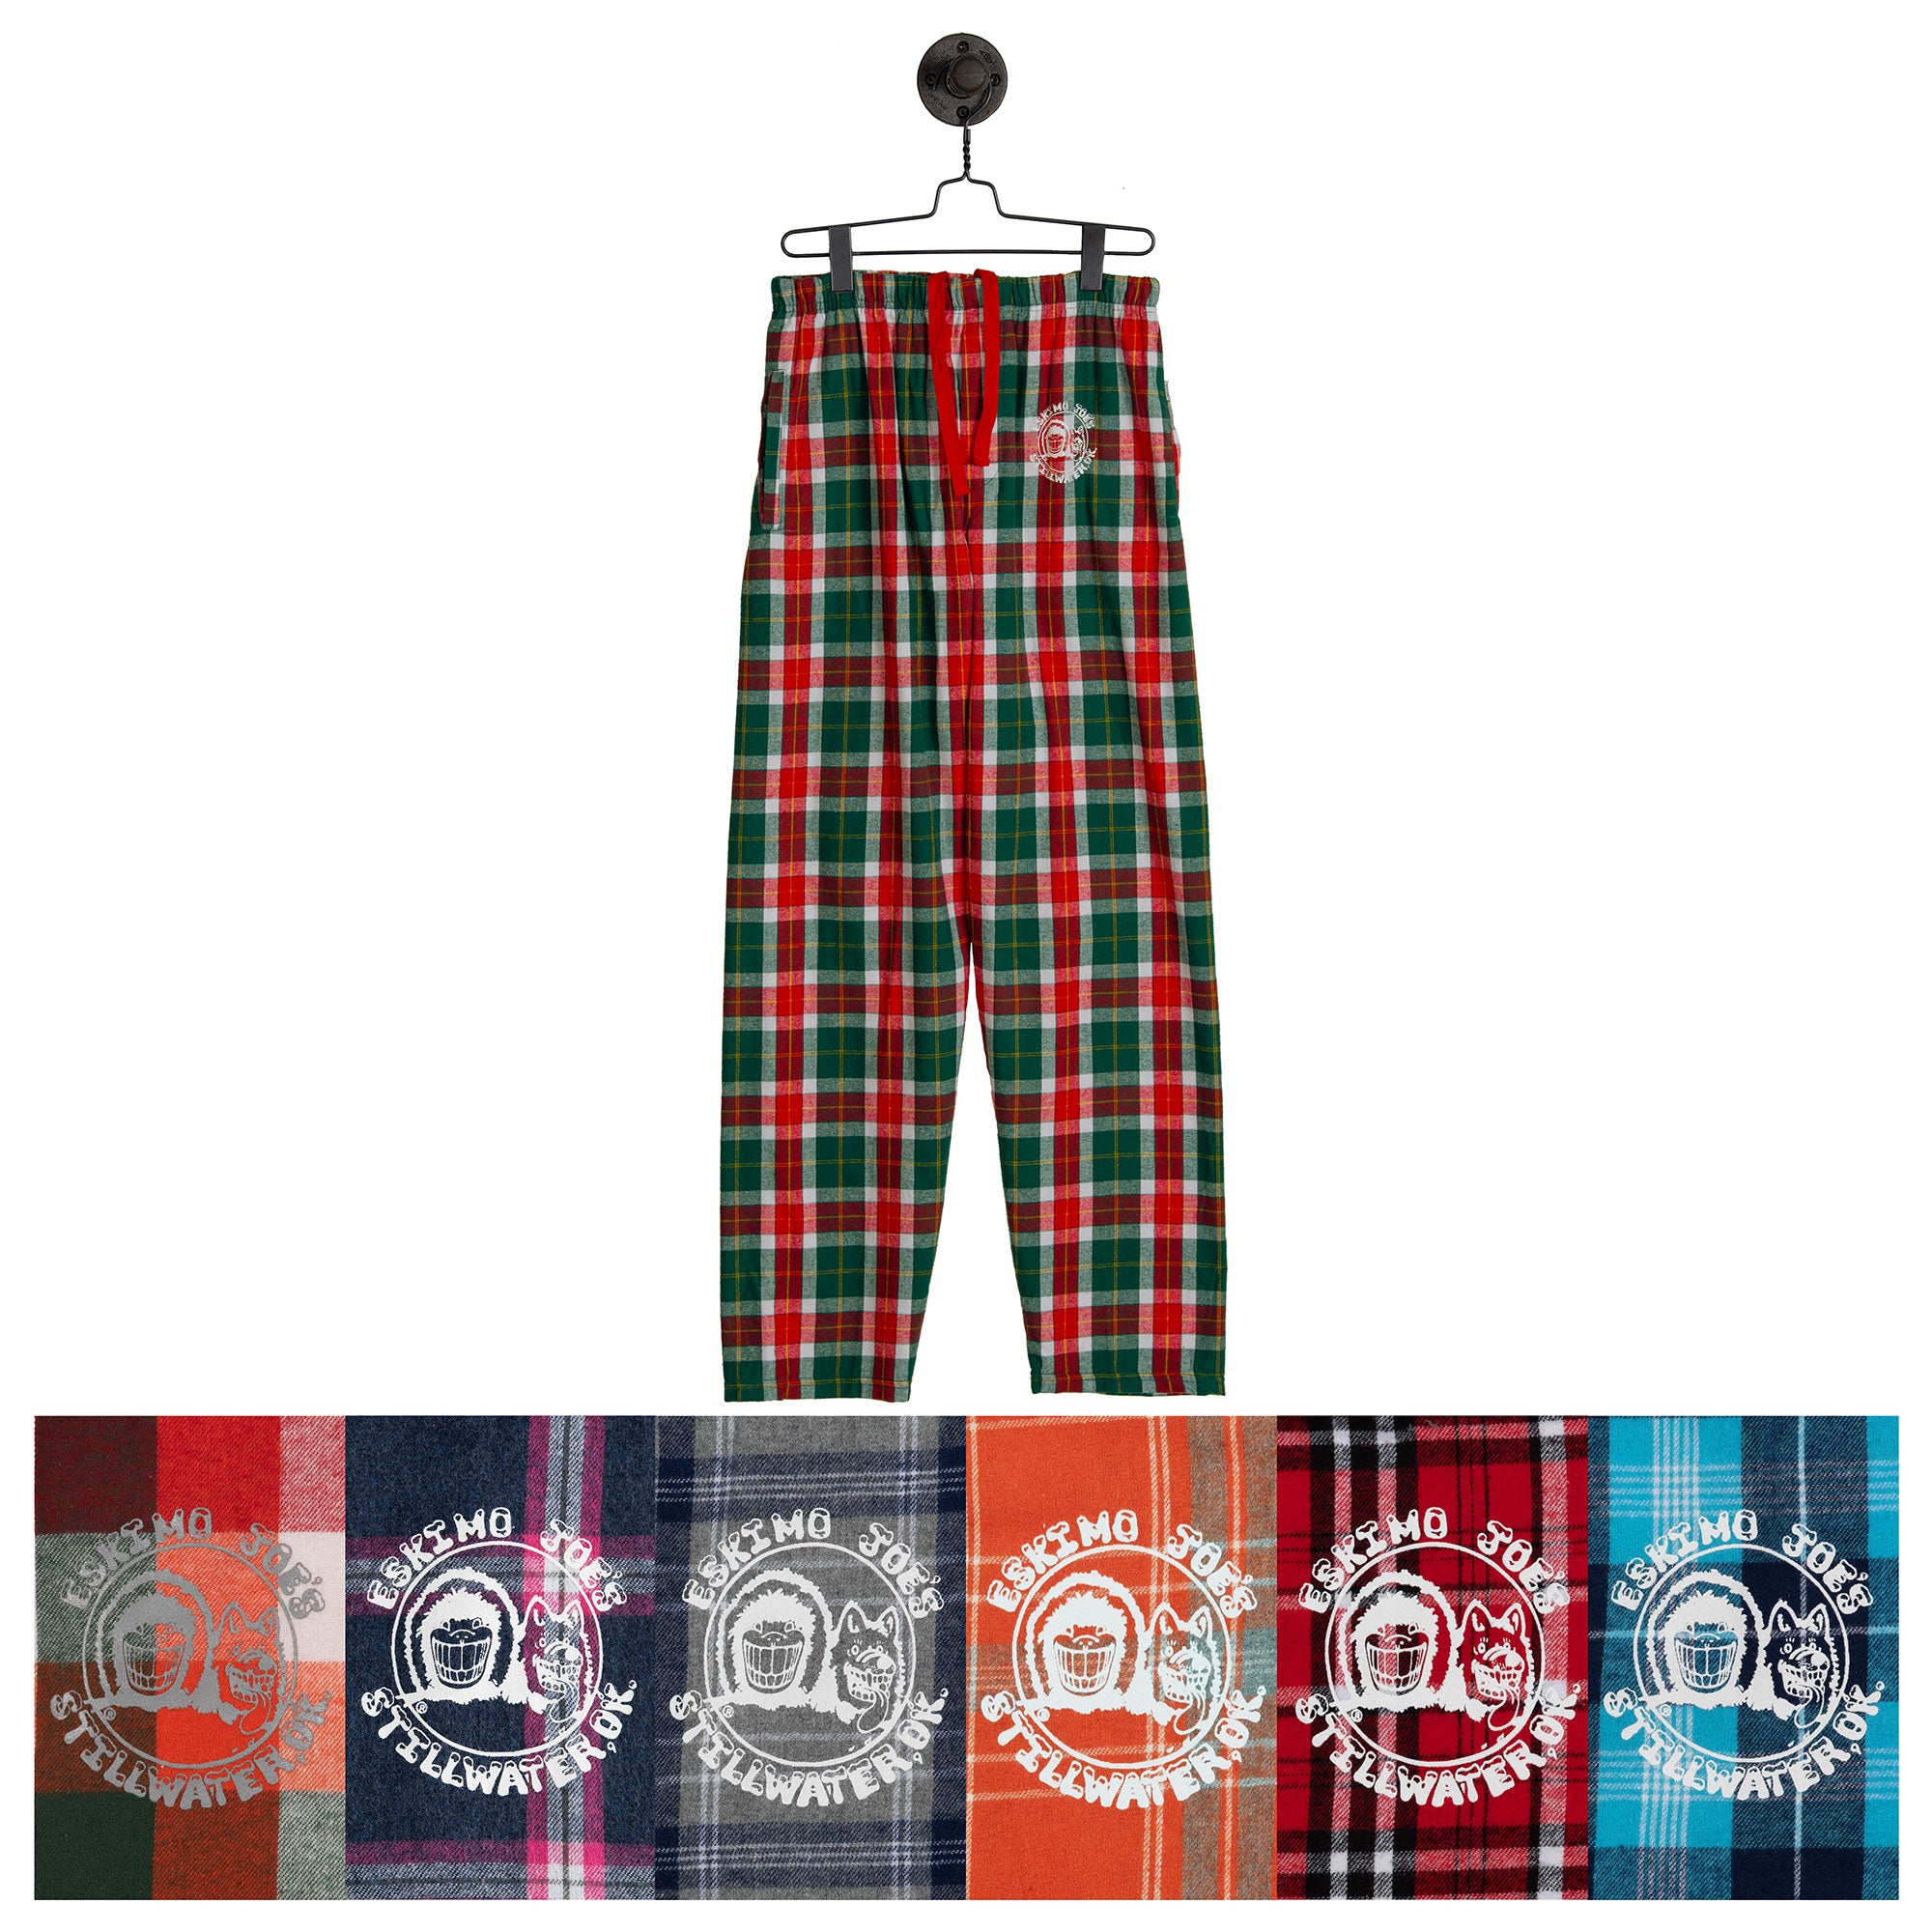 Plaid Green White Pajama Pants For Women Soft Cotton Women Pj Pants for  Winter Long X-Small at  Women's Clothing store